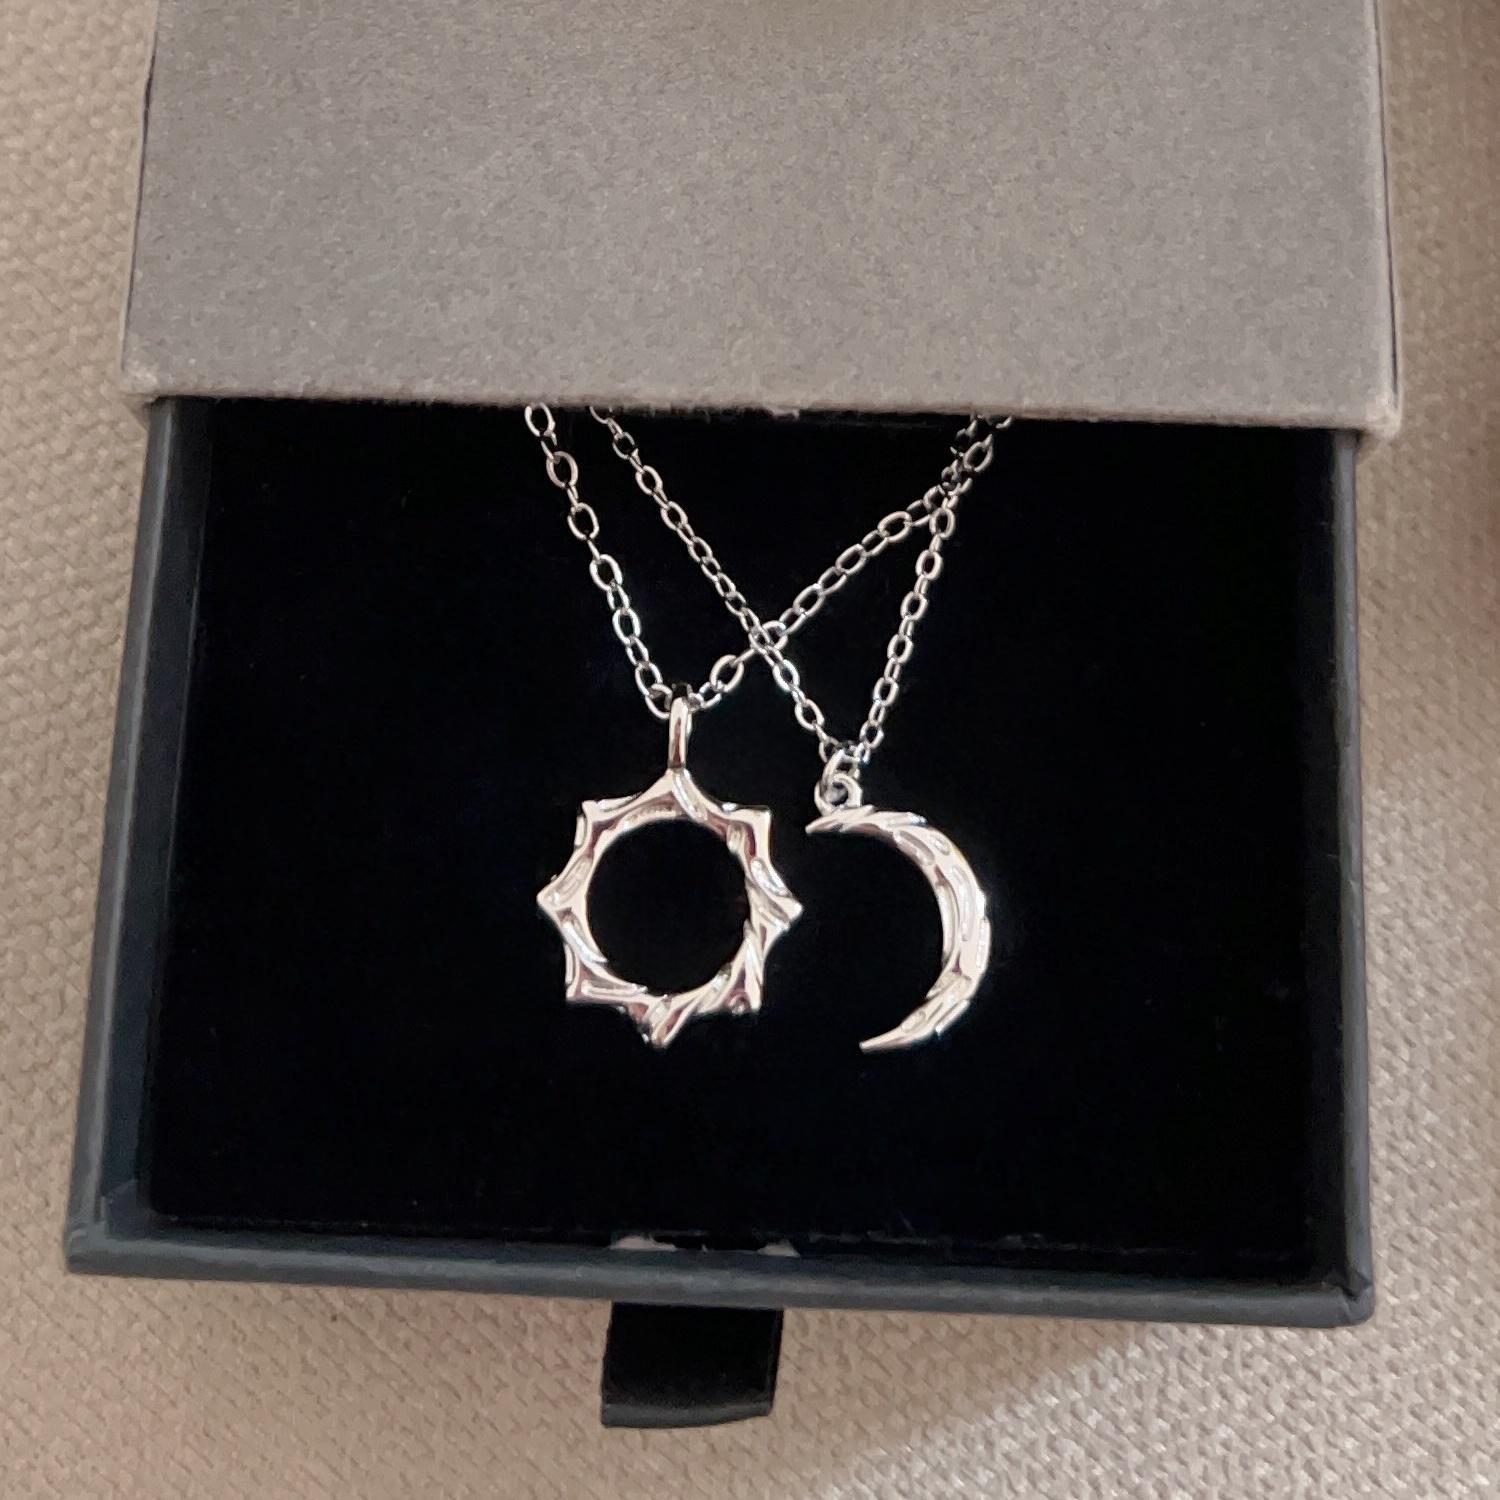 Unique Sun And Moon Love Matching Couple Necklaces In Sterling Silver - CoupleSets